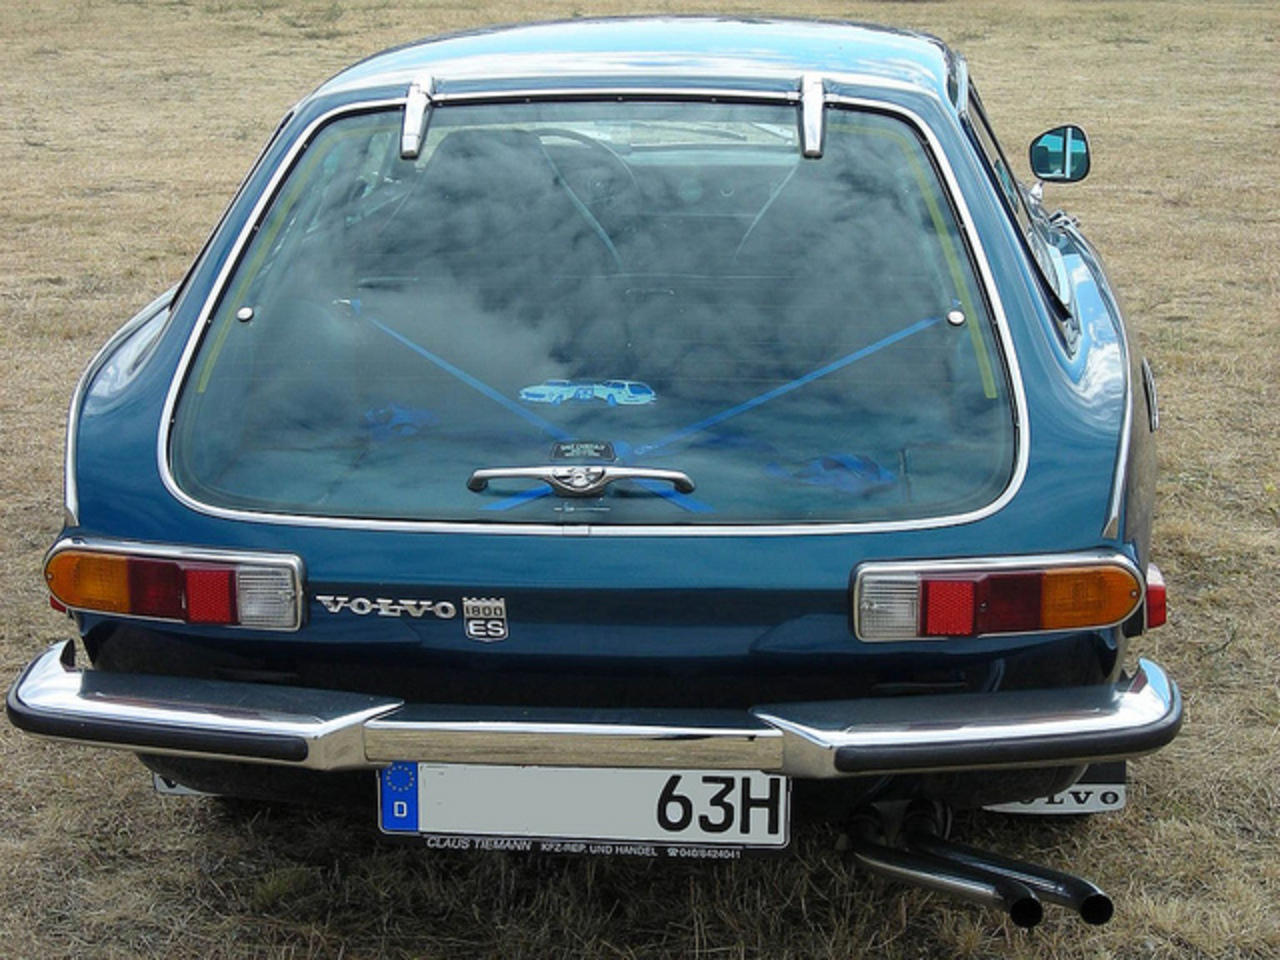 Volvo P1800 ES - all-glass tailgate | Flickr - Photo Sharing!